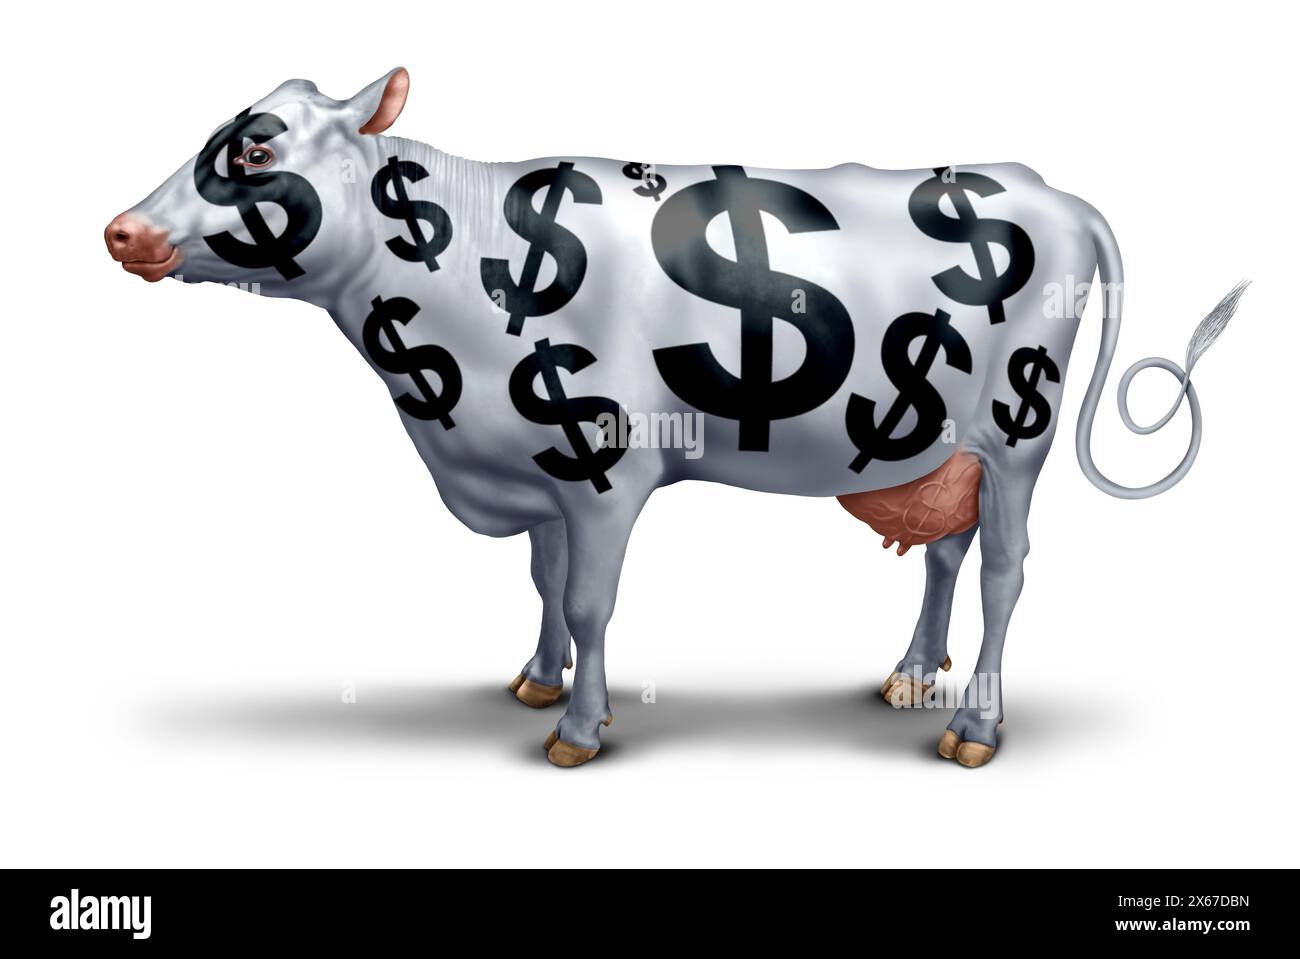 Cash Cow business success symbol  for a profitable company or service generating profit and growing wealth as a metaphor for profitability like cows. Stock Photo